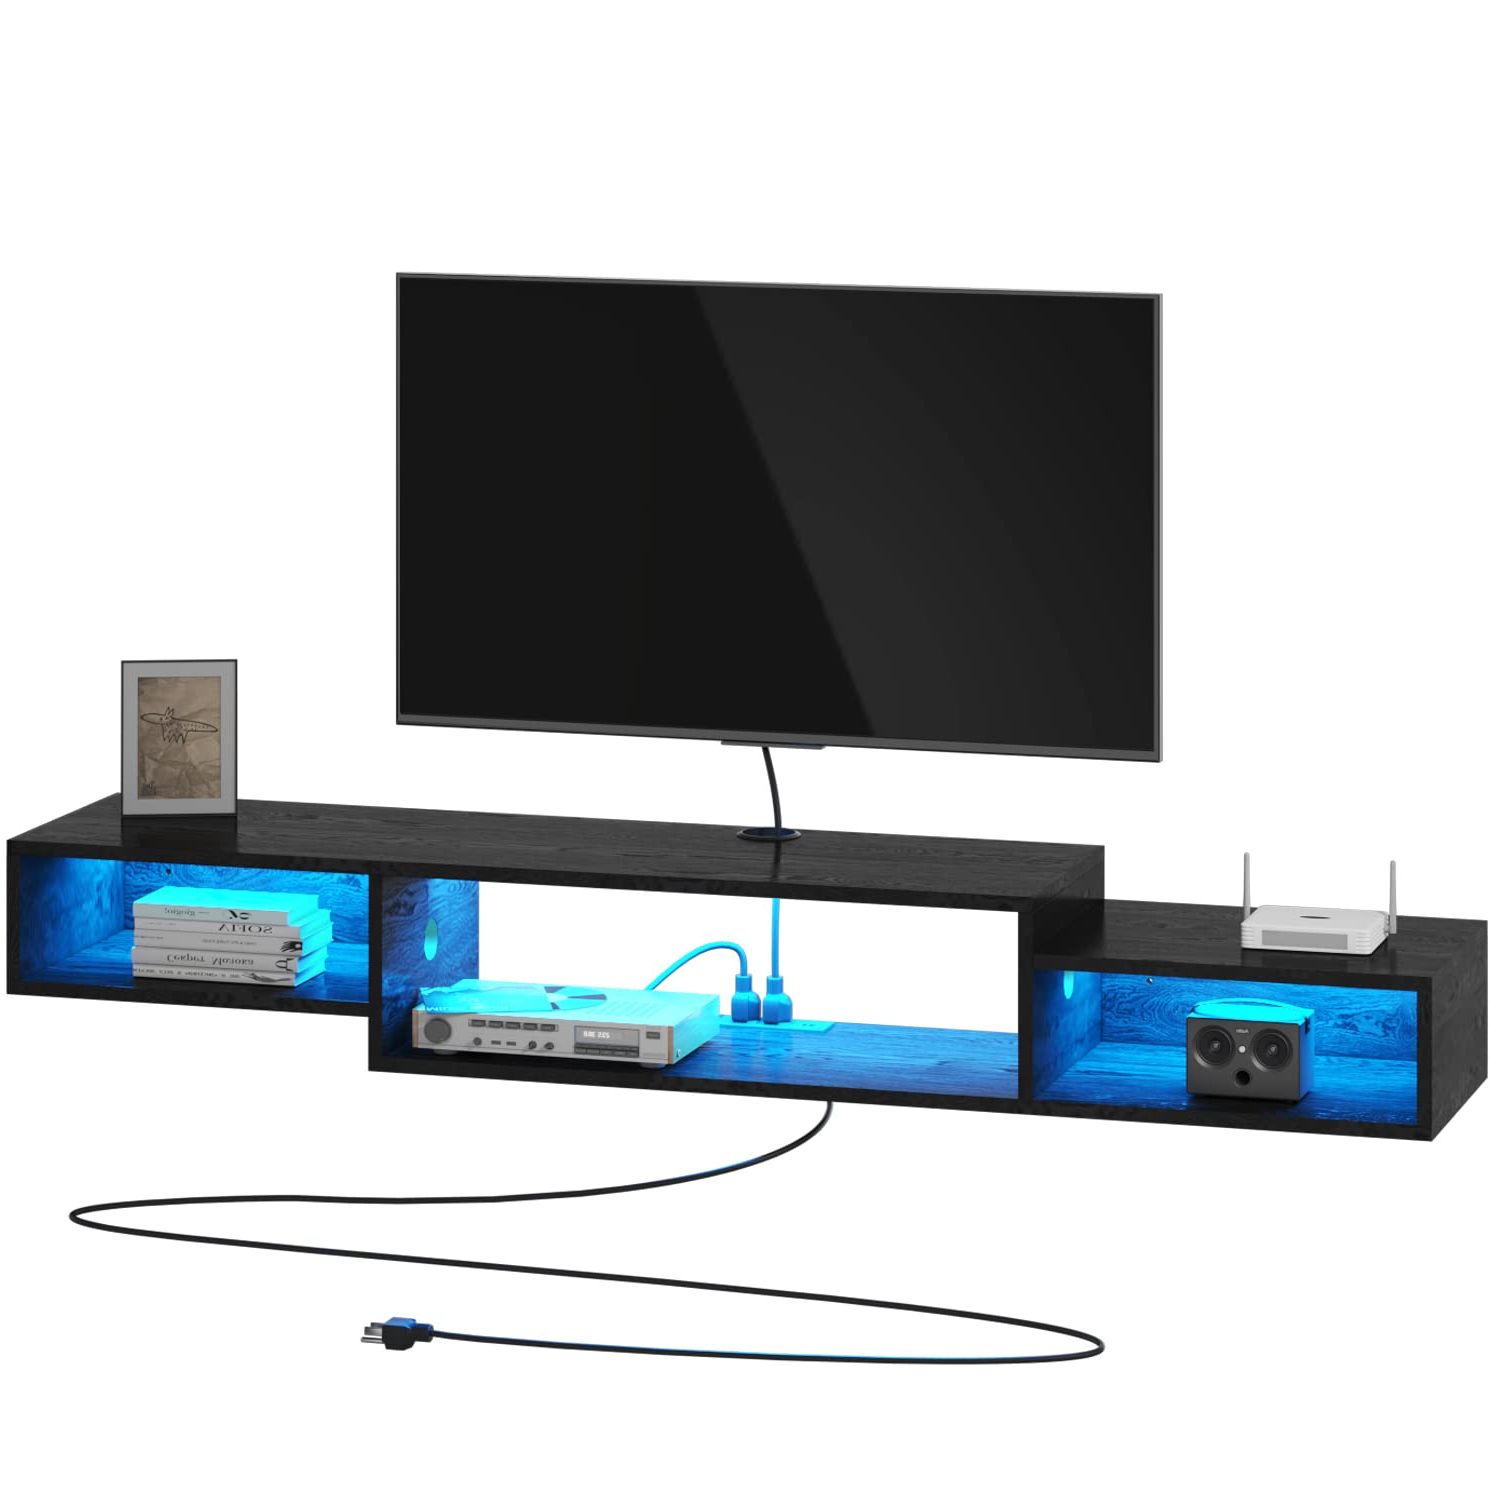 Buy Floating Tv Stand With Led Lights & Power Outlet, 59" Floating Tv Throughout Most Recent Led Tv Stands With Outlet (View 5 of 15)